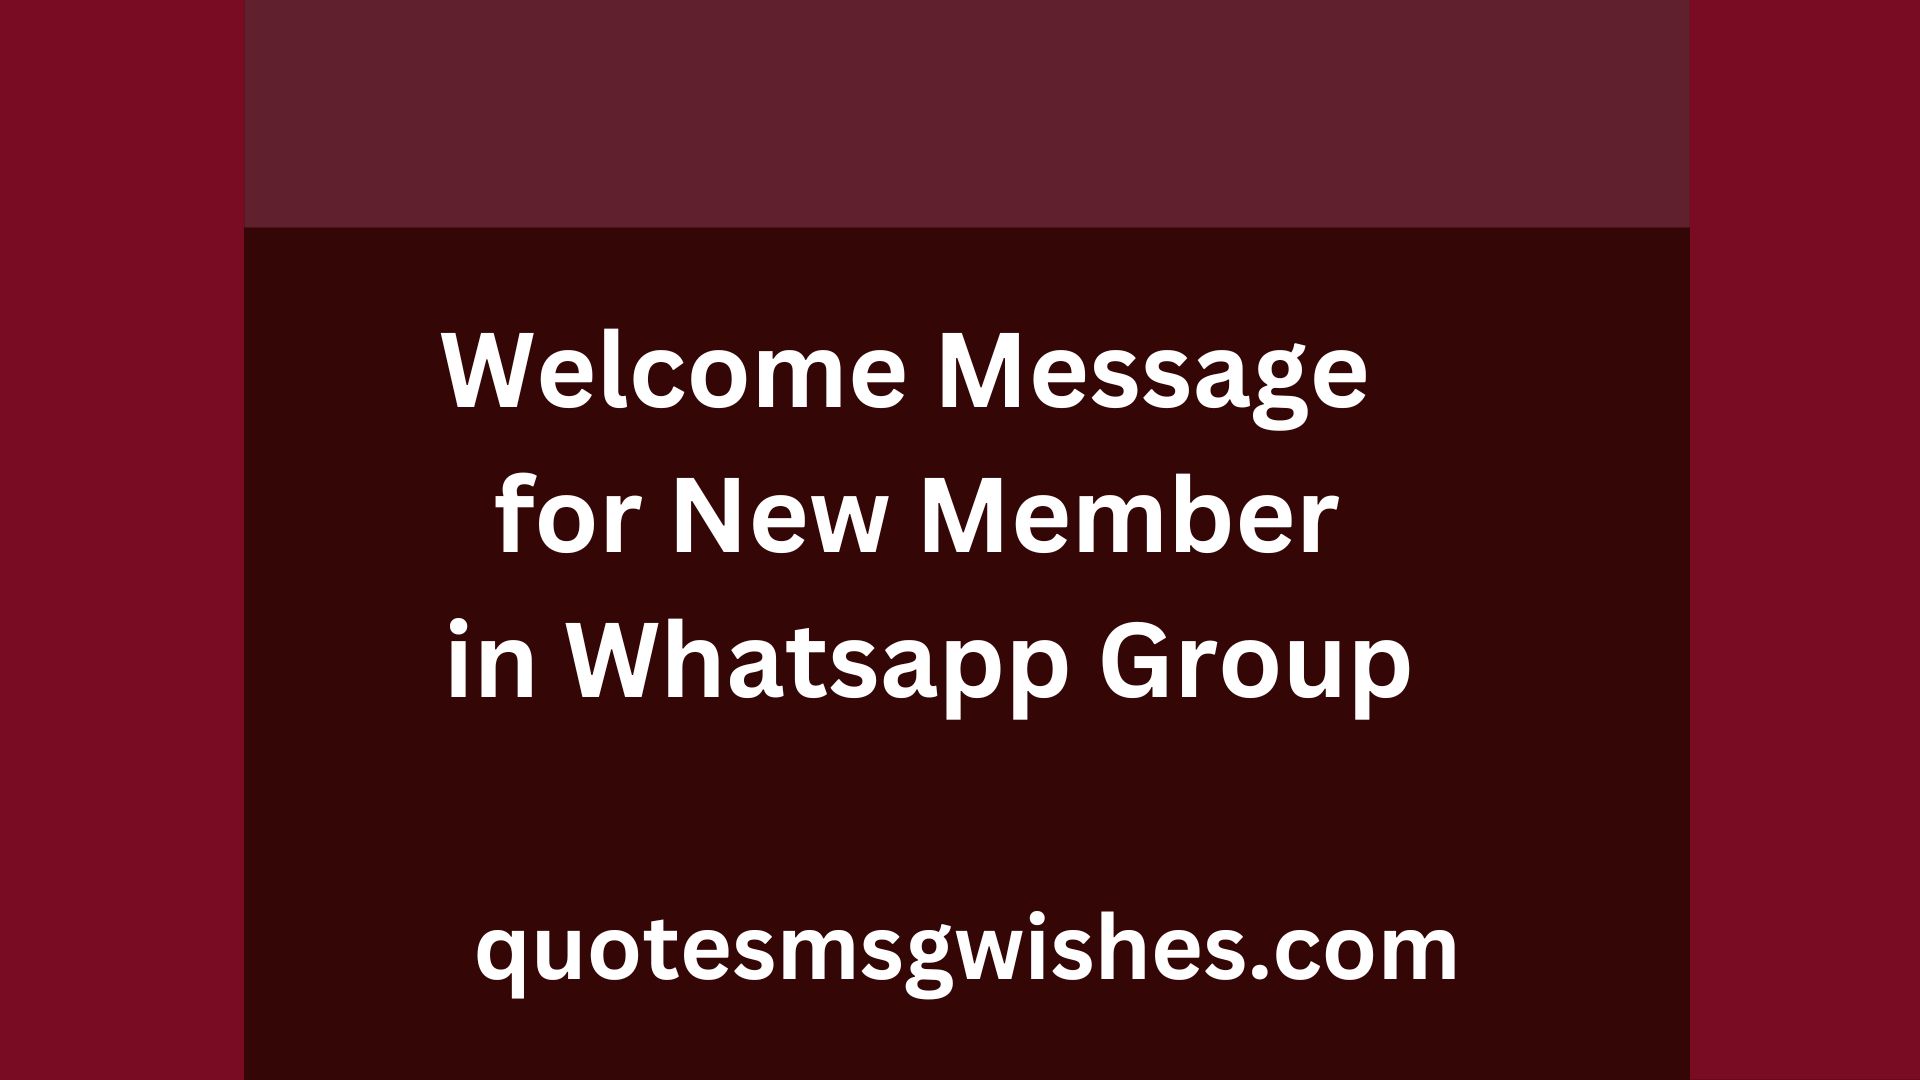 Welcome Message for New Member in Whatsapp Group